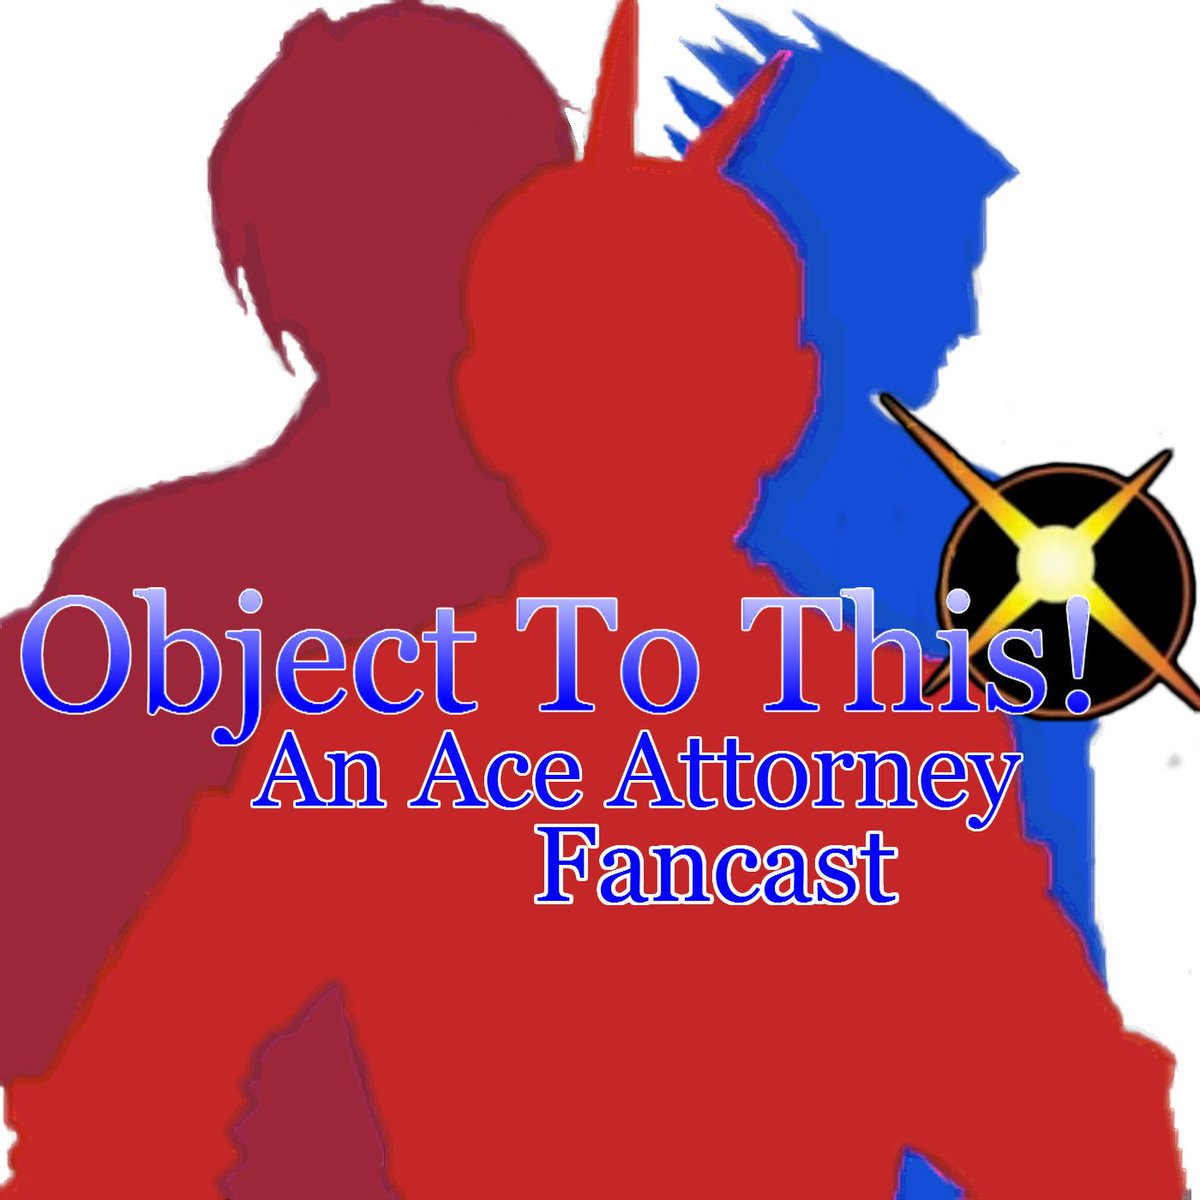 A personal favourite of mine is the Object to This podcast. They've been going strong for over seven years, and hosts Stephanie and Michelle go super in-depth on all things Ace Attorney.